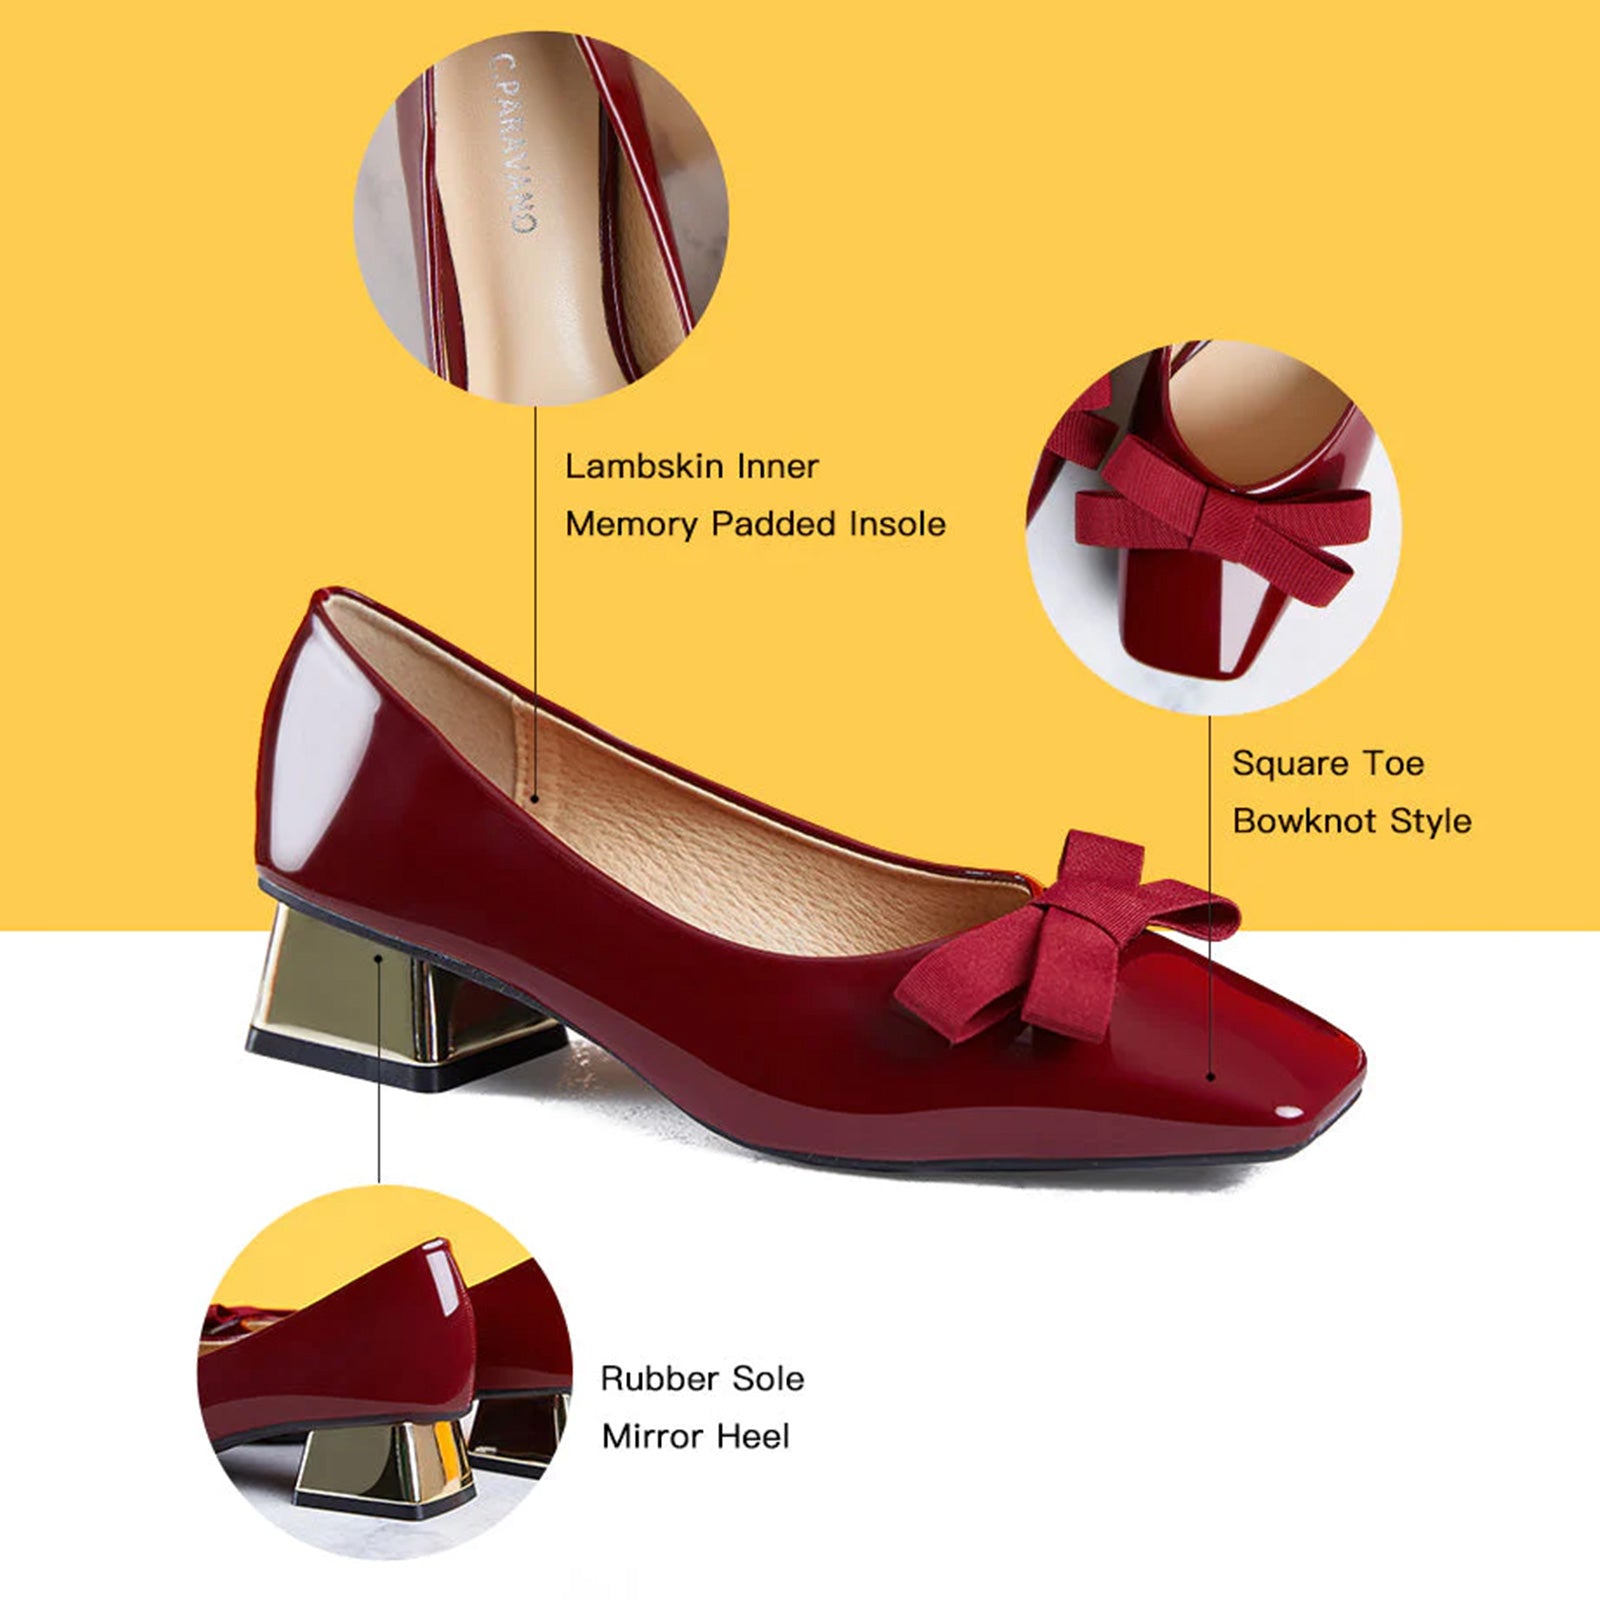 Red Patent Leather Block Heel Pumps, a glamorous choice for special occasions and events.